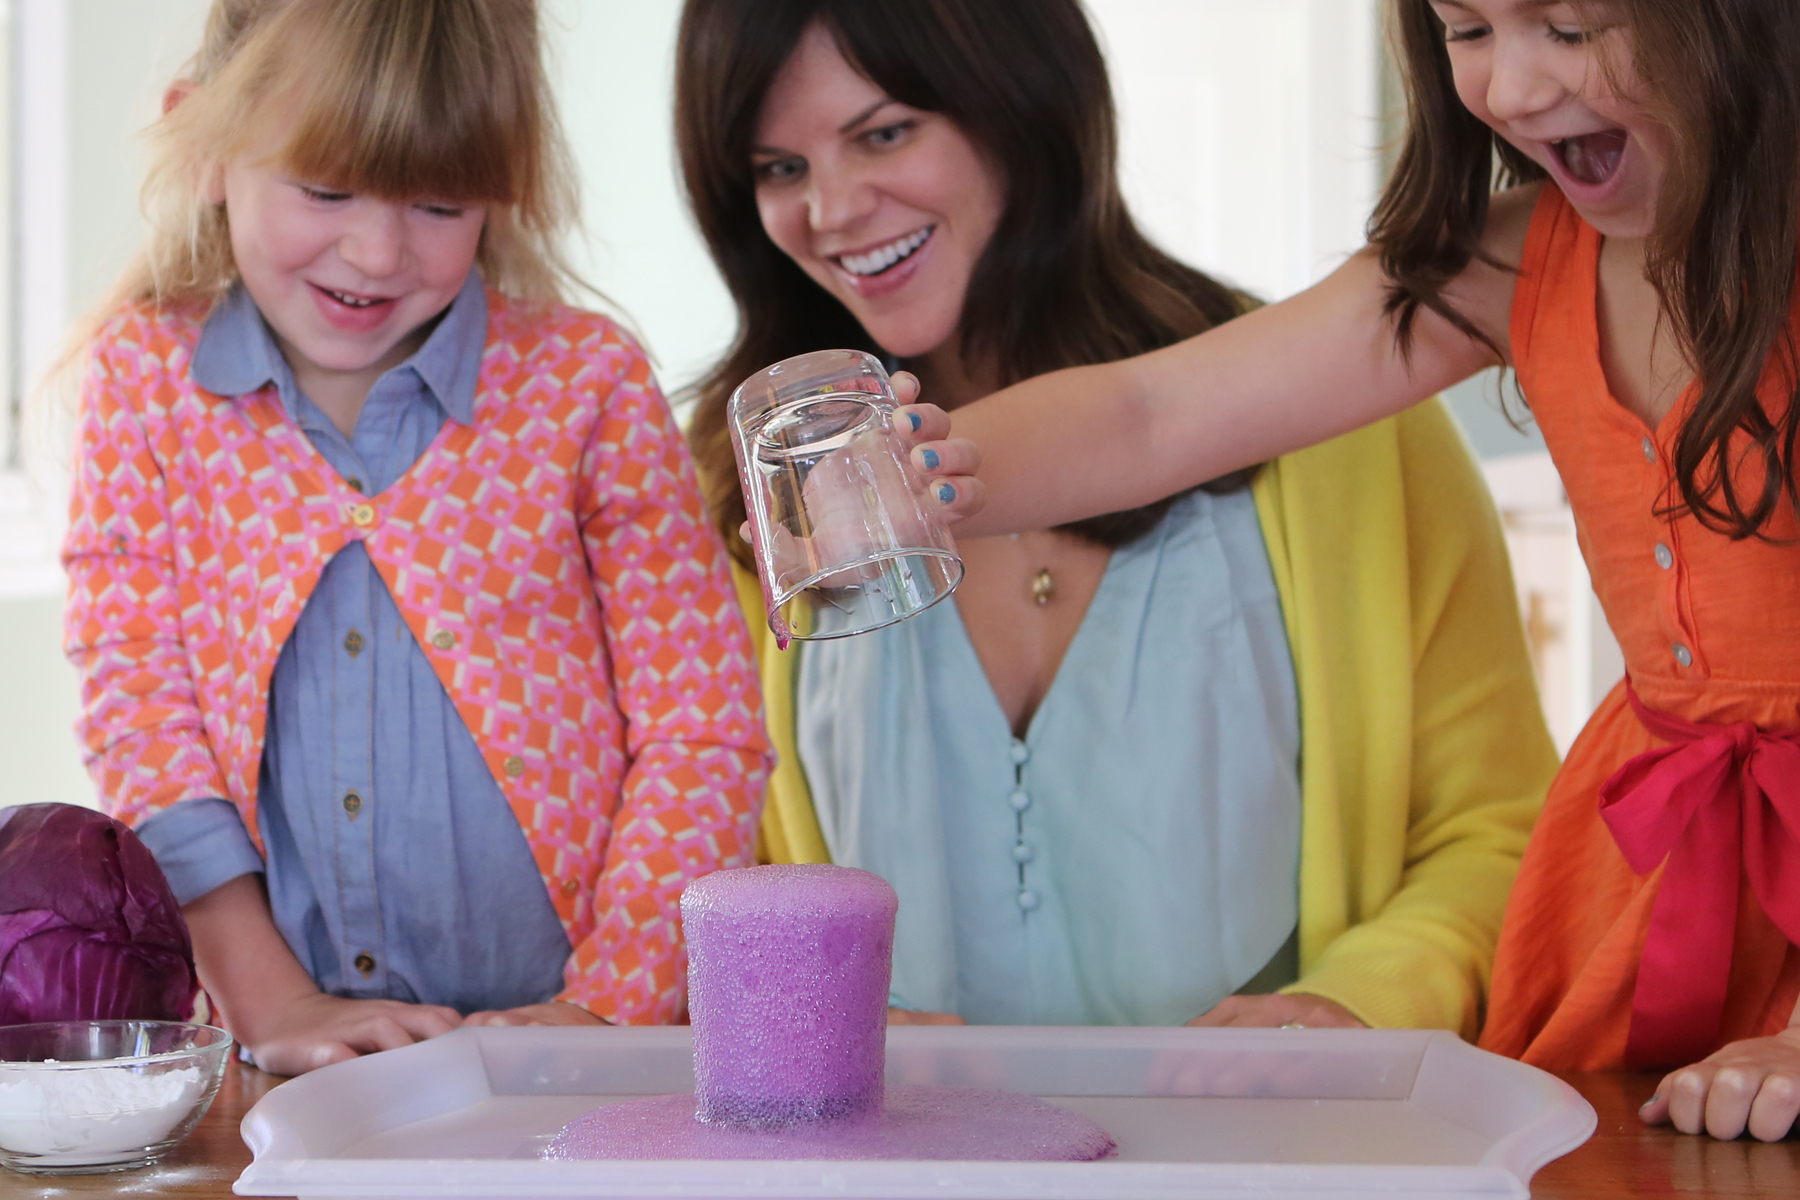 Cool Science Experiments for kids - Baking soda magic potion